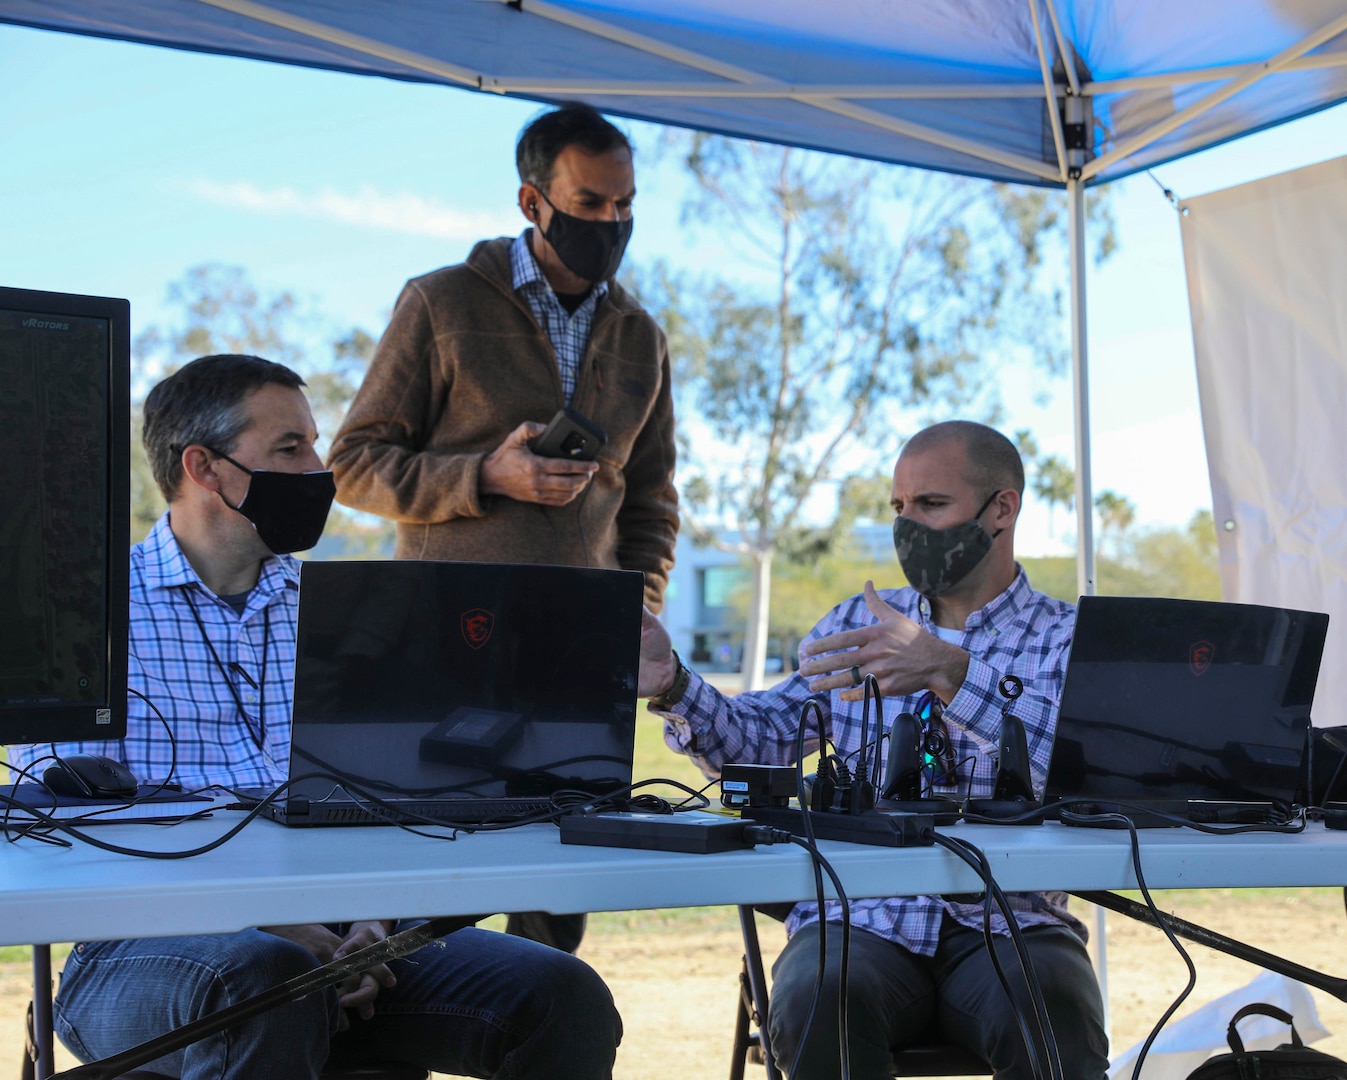 NORCO, Calif. (March 2, 2021) Communication System Engineer Ben Fellows of Naval Surface Warfare Center (NSWC) Corona Division (left) discusses operational drone capabilities with vRotors President Neil Malhotra (center) and Tom Collins of Naval Information Warfare Center Pacific during a 5G Demo Day flight test event at Norco College. The Navy's Inland Empire Tech Bridge, anchored by NSWC Corona, networked with the college to host the event, during which vRotors demonstrated technologies for the Marine Corps for a National Security Innovation Network (NSIN) 5G Starts prize challenge. (U.S. Navy photo by Nathan Fite/RELEASED)